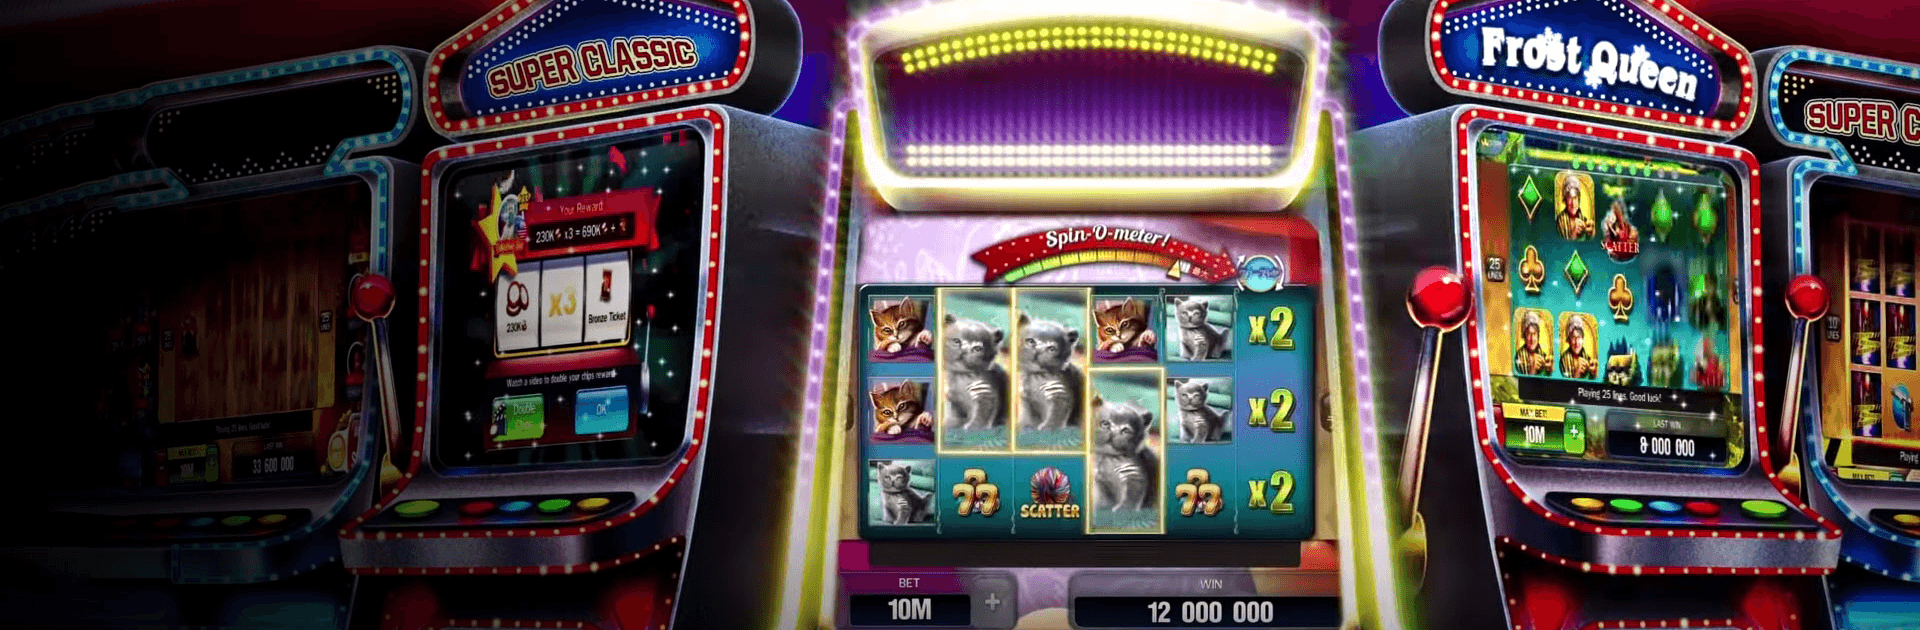 casinos - What Do Those Stats Really Mean?